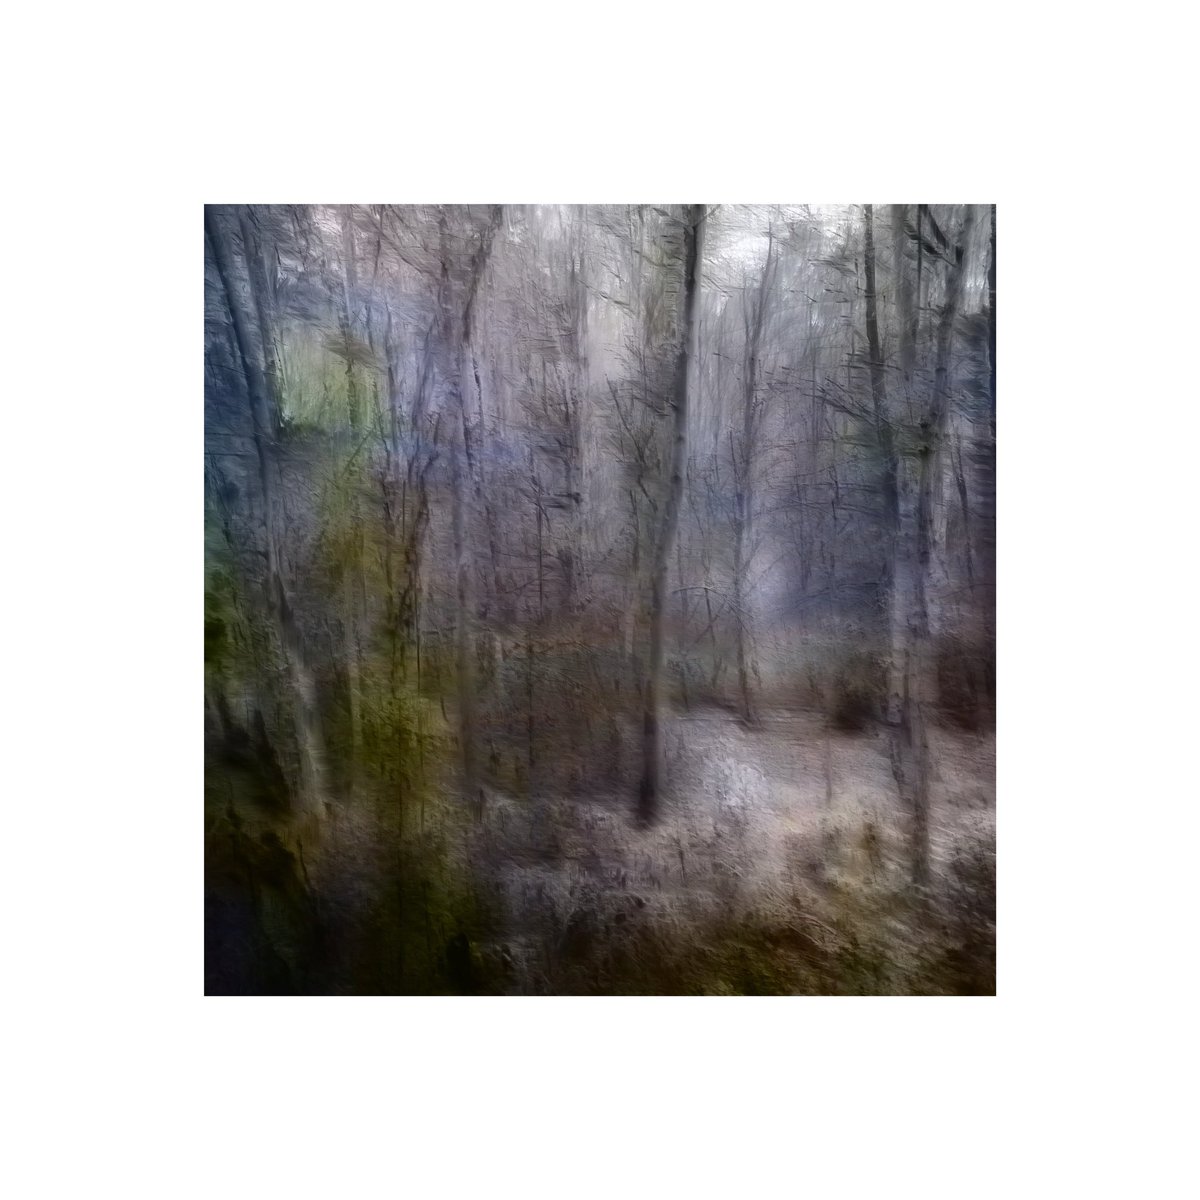 day 174 365 days of icm photography  #icmphotography #icm #intentionalcameramovement #abstractphotography #abstract #icmphoto #icmphotomag #impressionistphotography #bluronpurpose #camerapainting #fieldrecording #audiophotography #365in2023